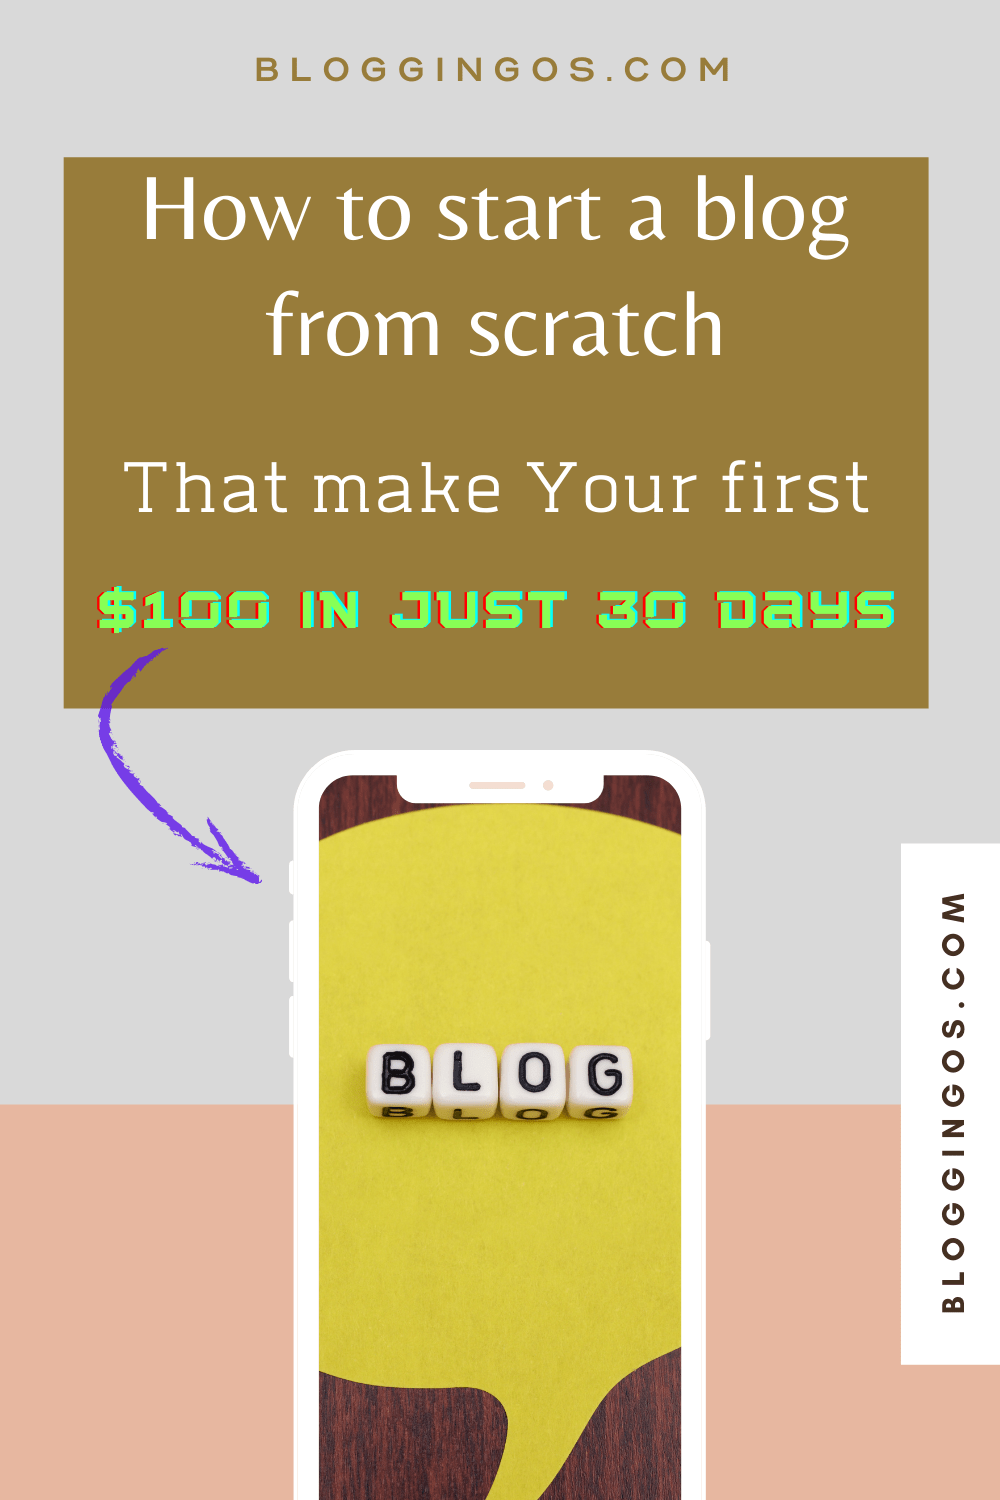 How to start your blog that make your first $100 income in 30 days